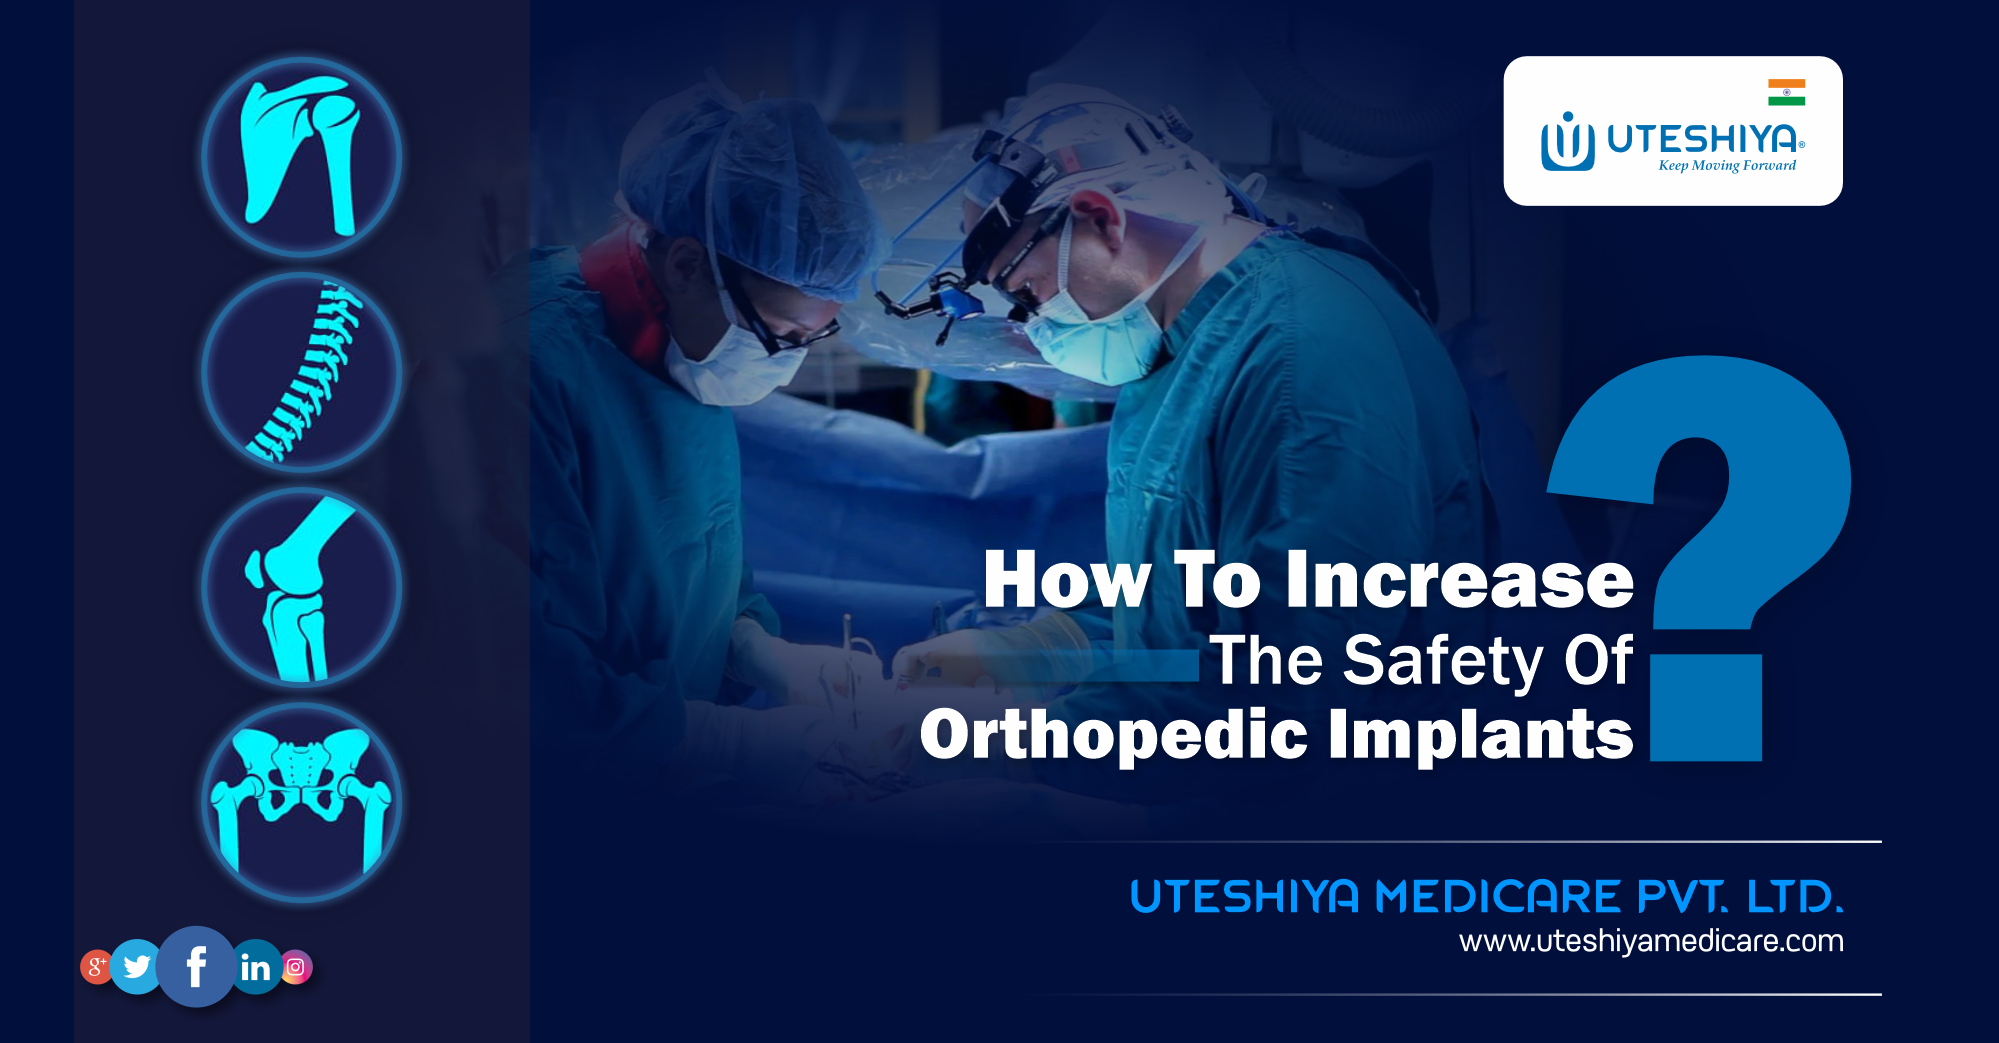 How To Increase The Safety Of Orthopedic Implants?